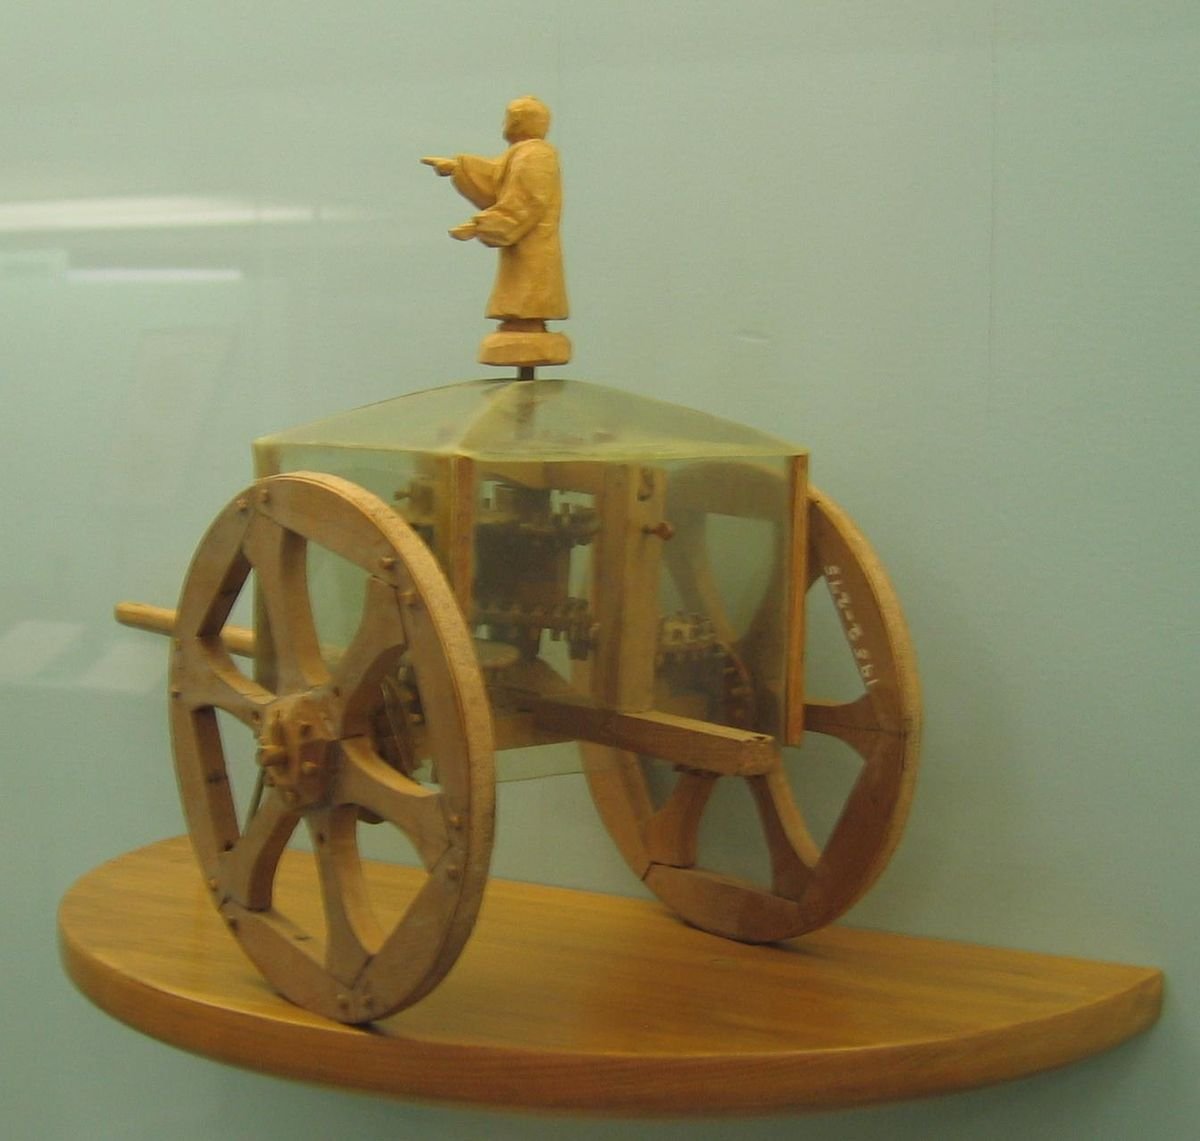 The ancient Chinese invented a 'South-pointing chariot' containing a complex gear system that would maintain a figure mounted on it always pointing in a certain direction (i.e. south) to assist in land travel.